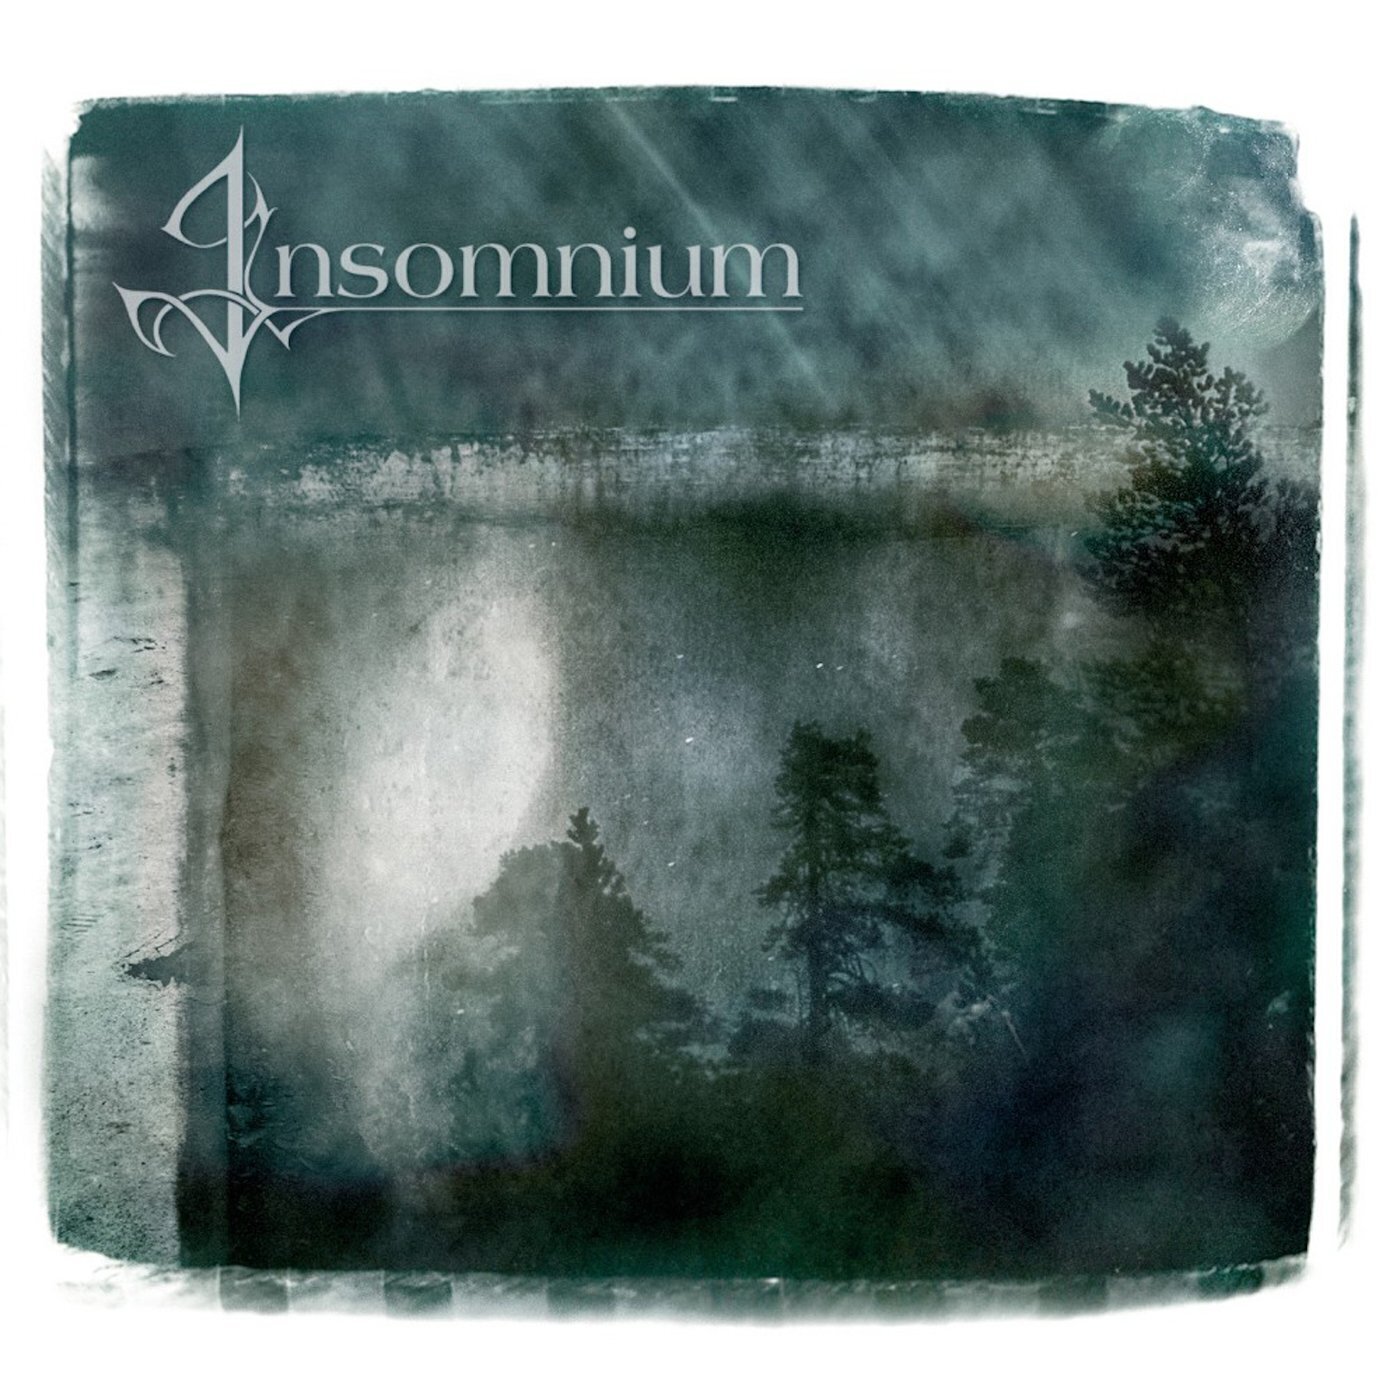 Disco in vinile Insomnium - Since The Day It All Came (2 LP)